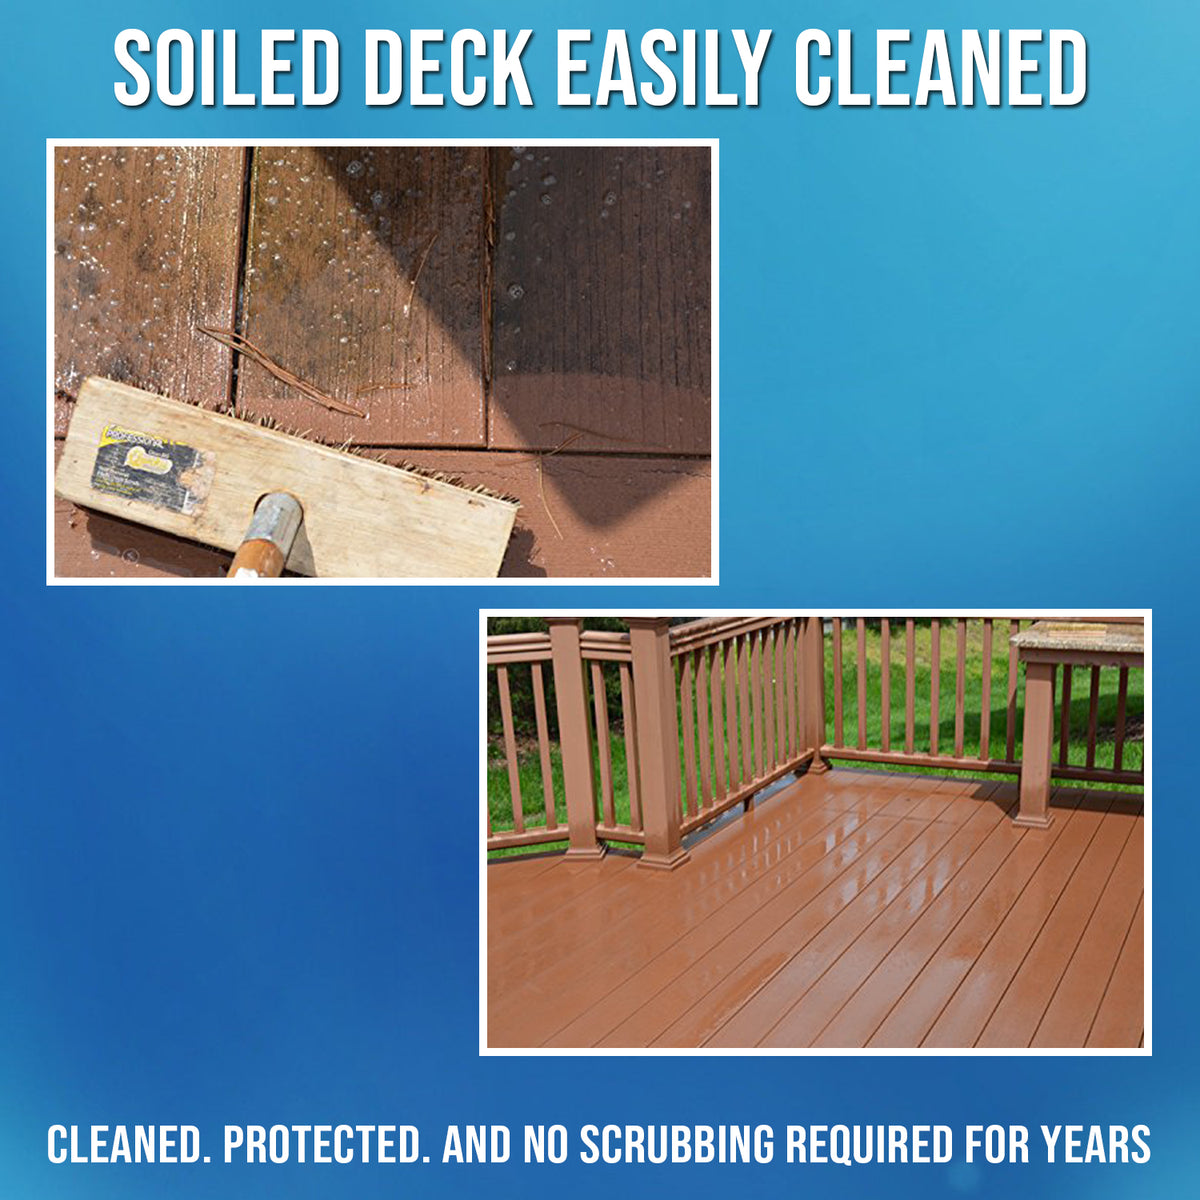 Solid deck easily cleaned